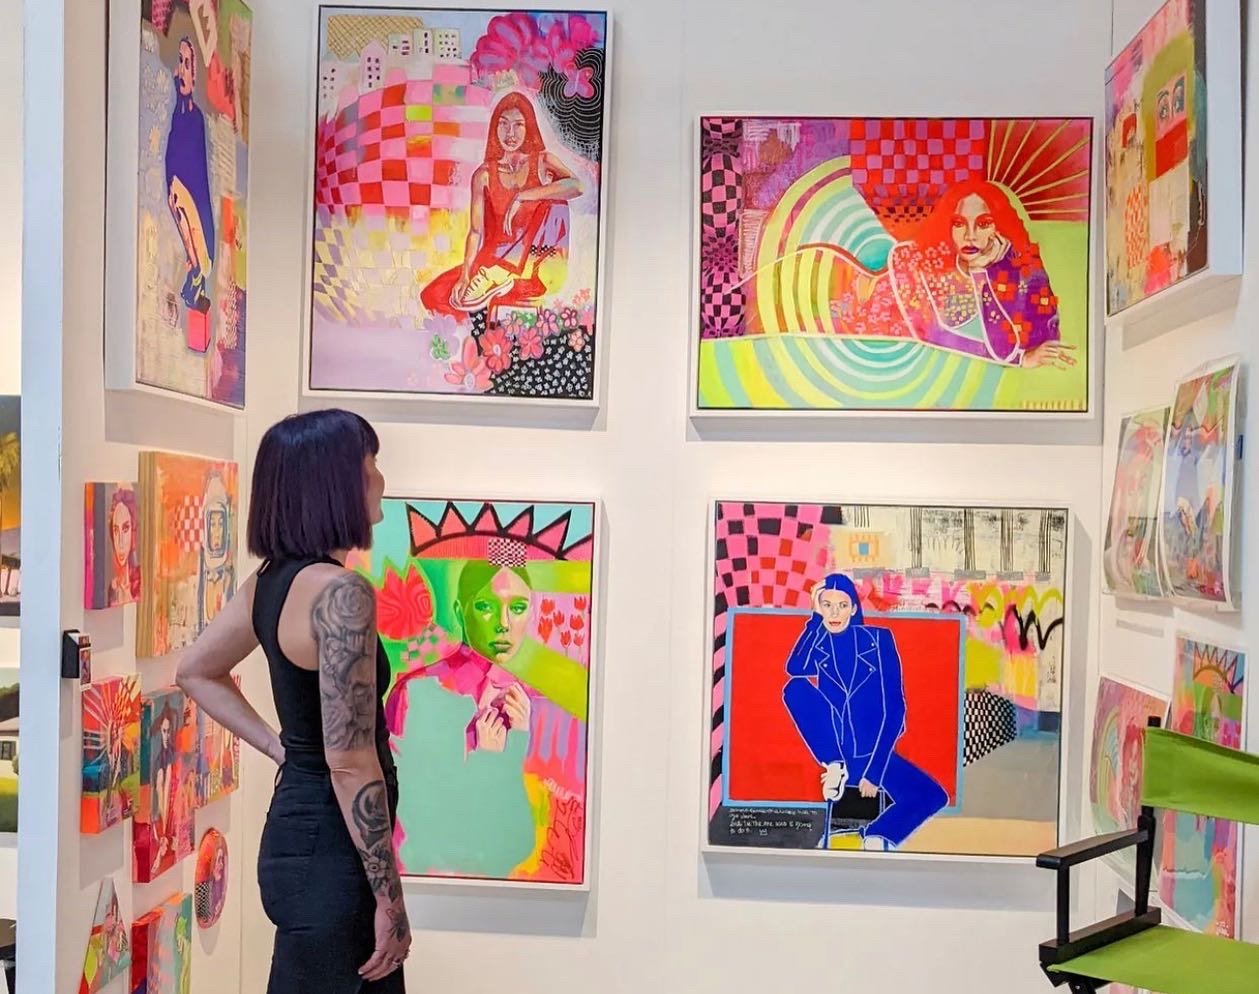 Photo Credit: Milan Art, short-haired women with tattooed arm looking up at bold-colored canvases or women posing in different positions surrounded by shapes